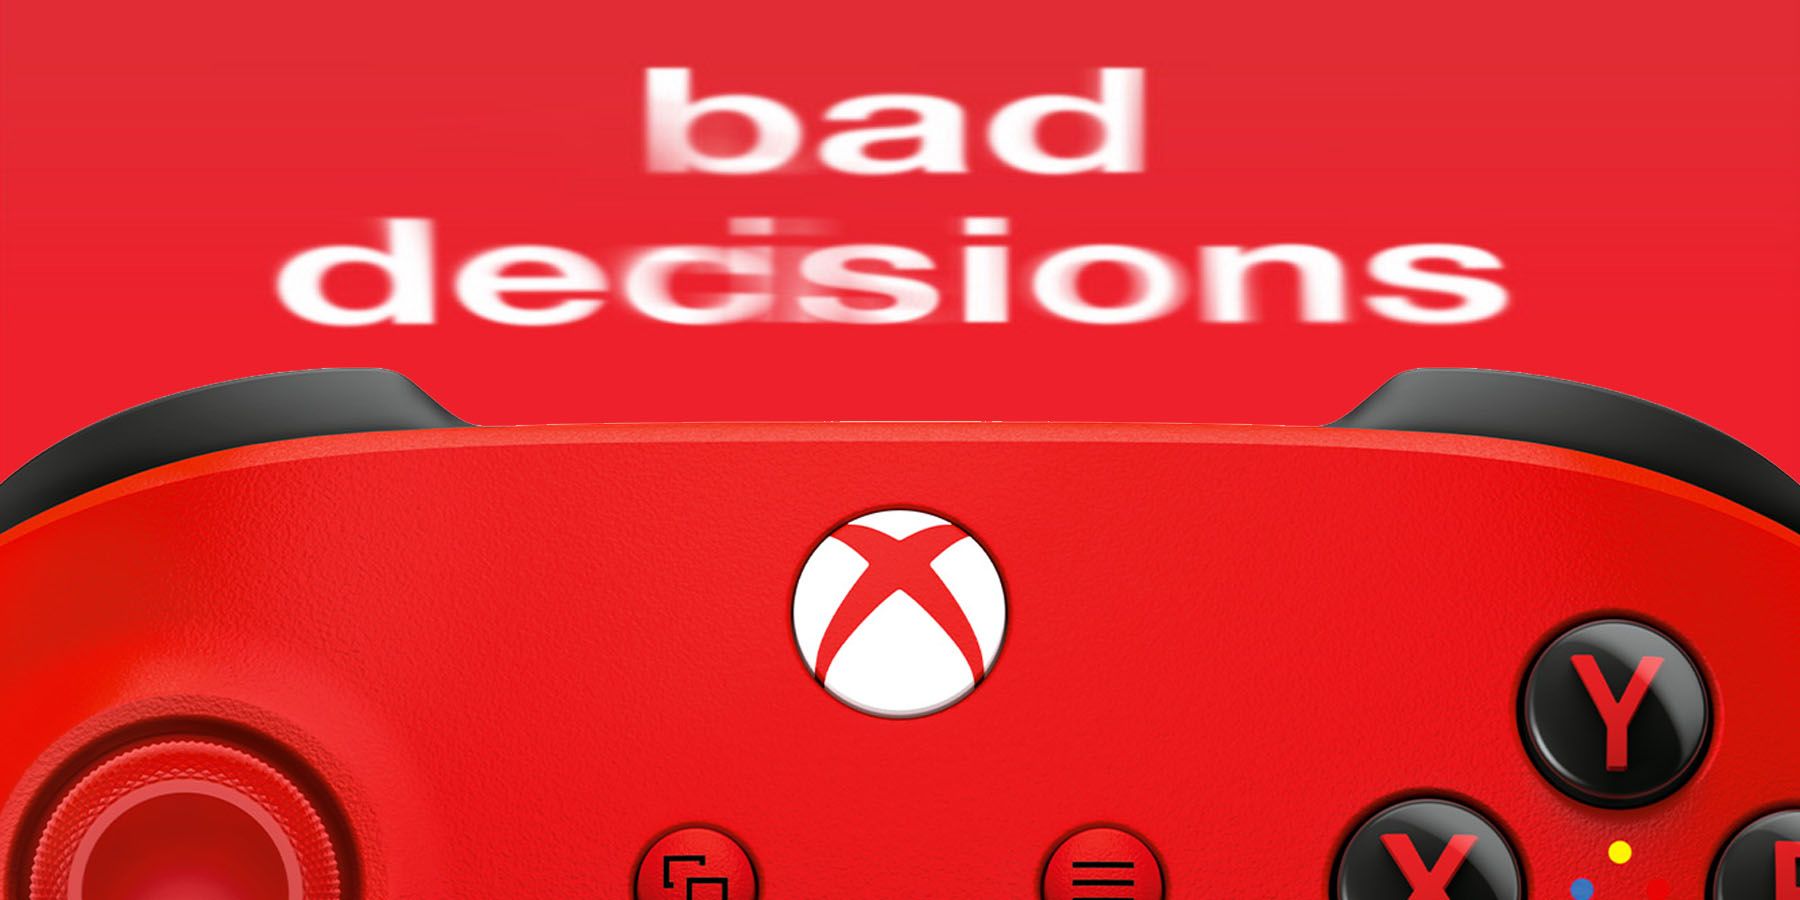 Bad Decisions Xbox Controller